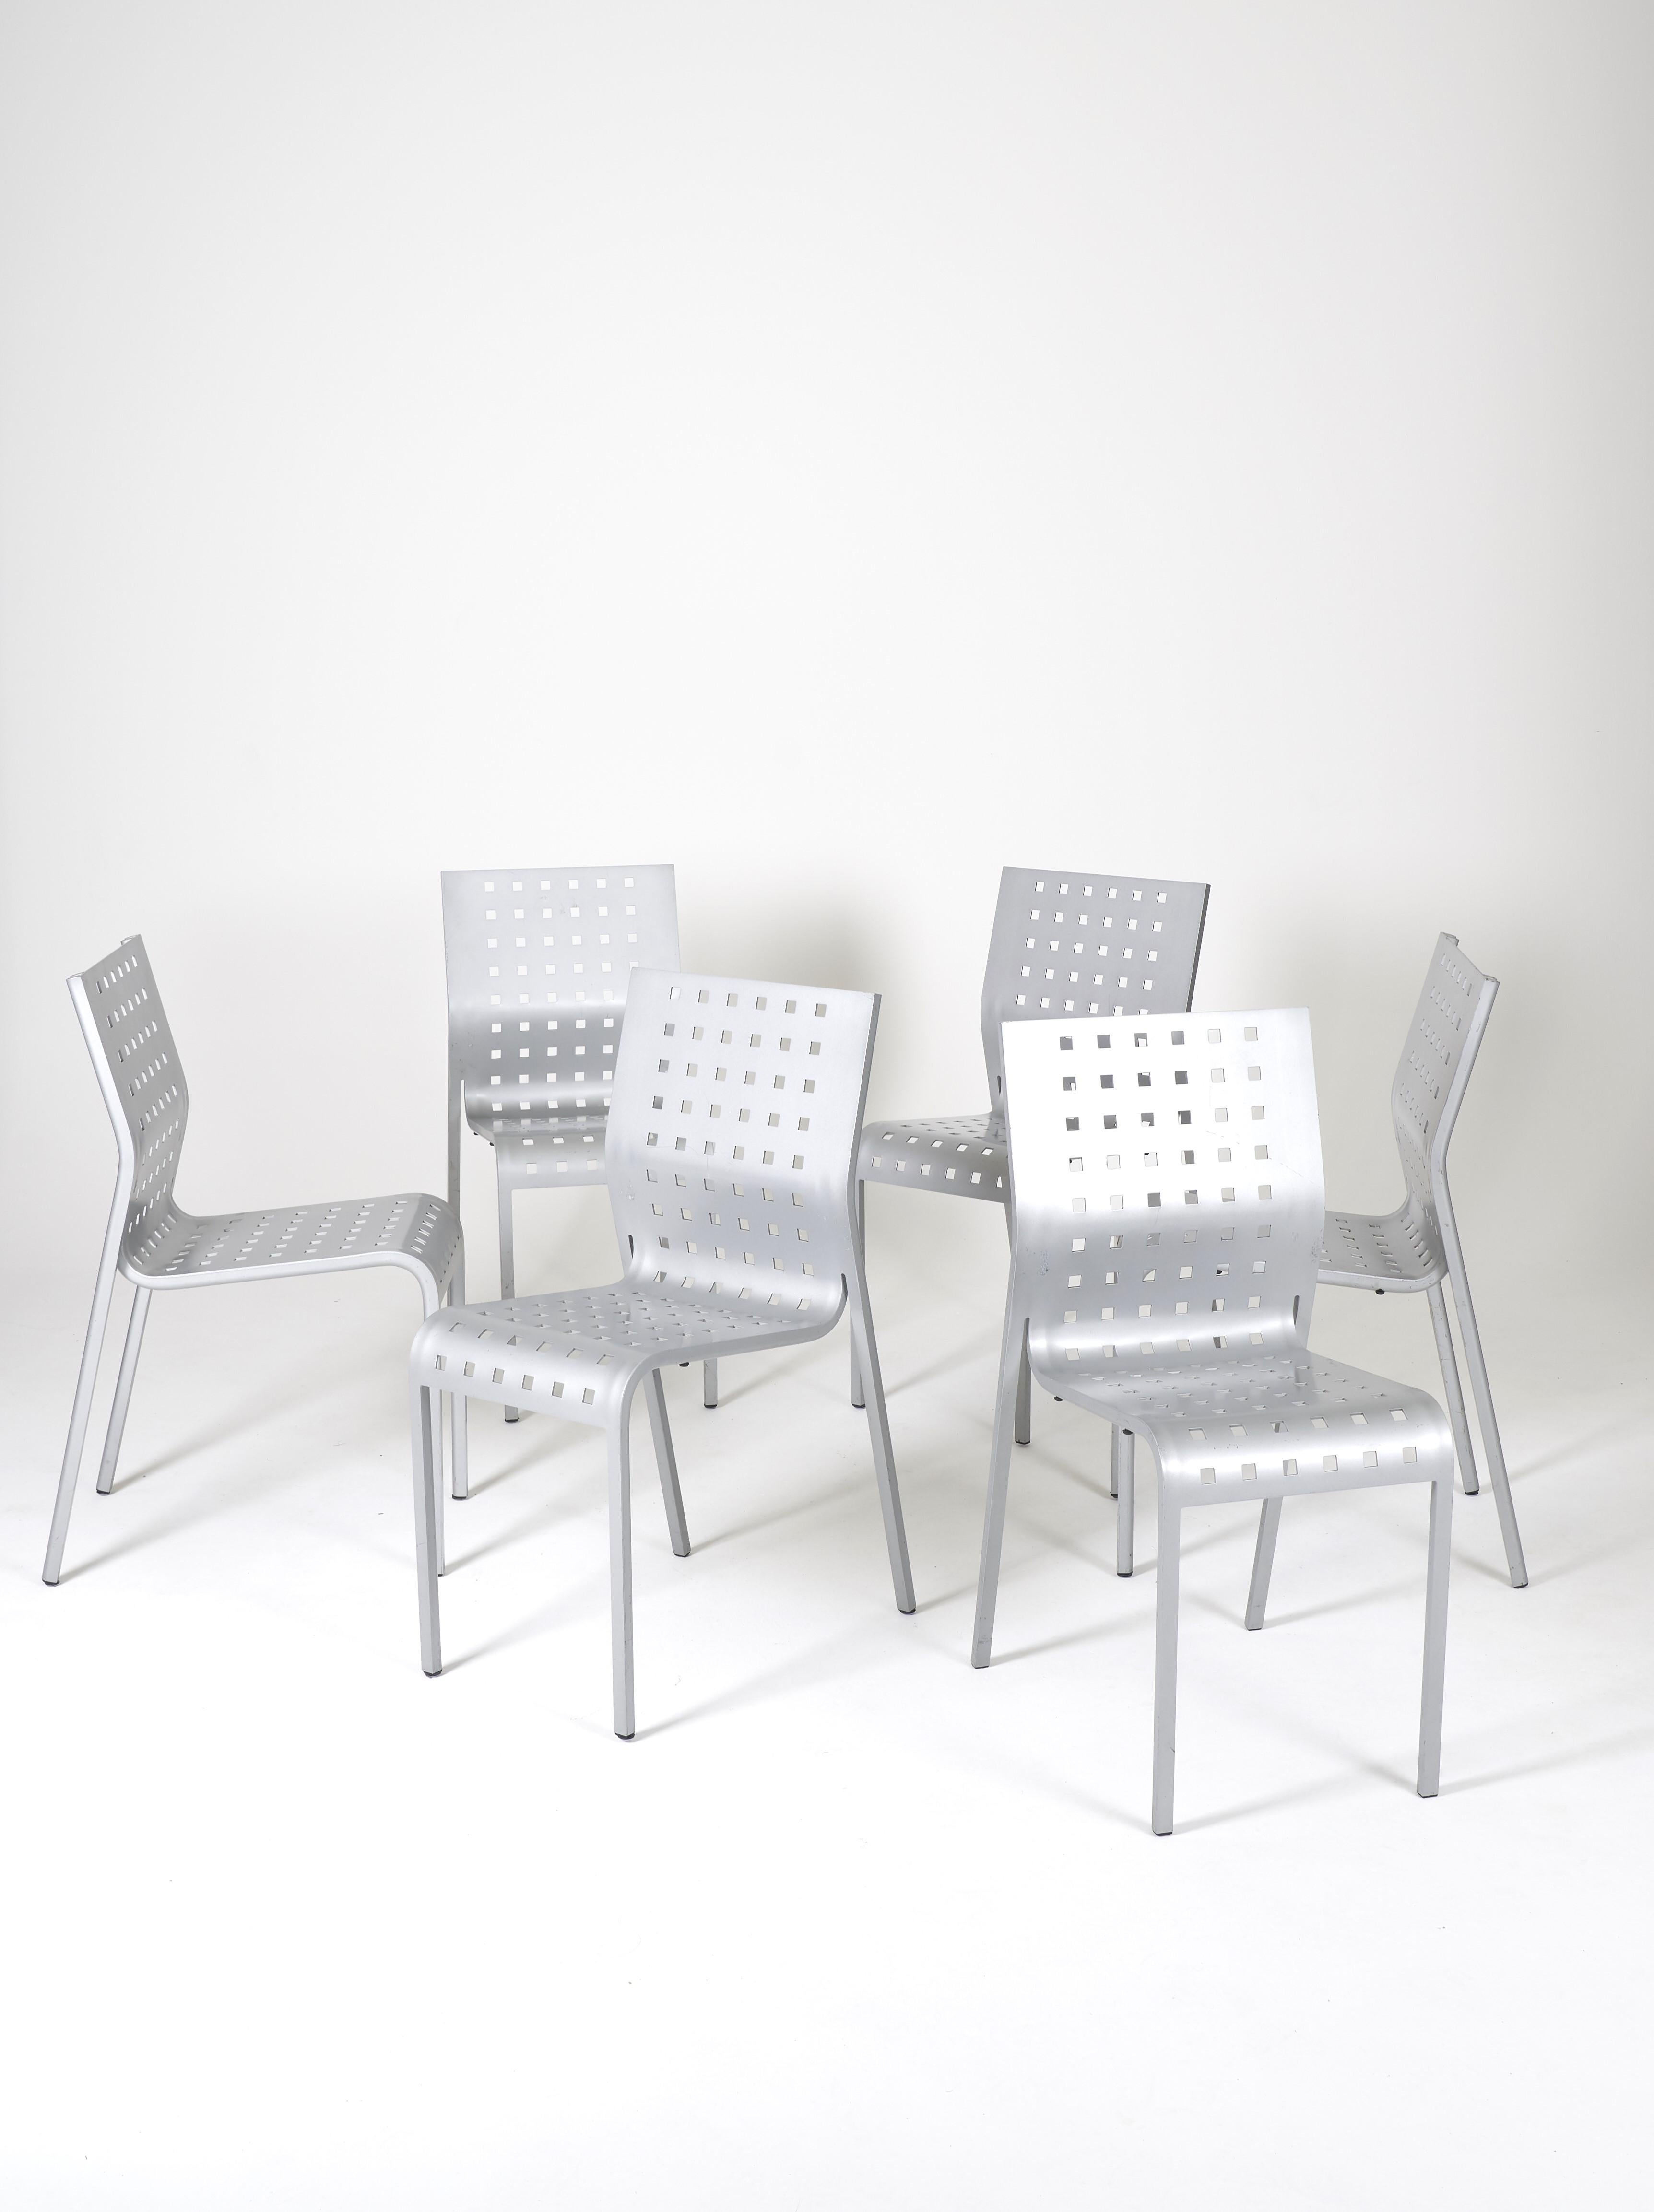 Set of 6 Mirandolina chairs n° 2068 by Pietro Arosio for Zanotta, Italy 1990s. The seat is made of a single piece of curved aluminum. Very comfortable.